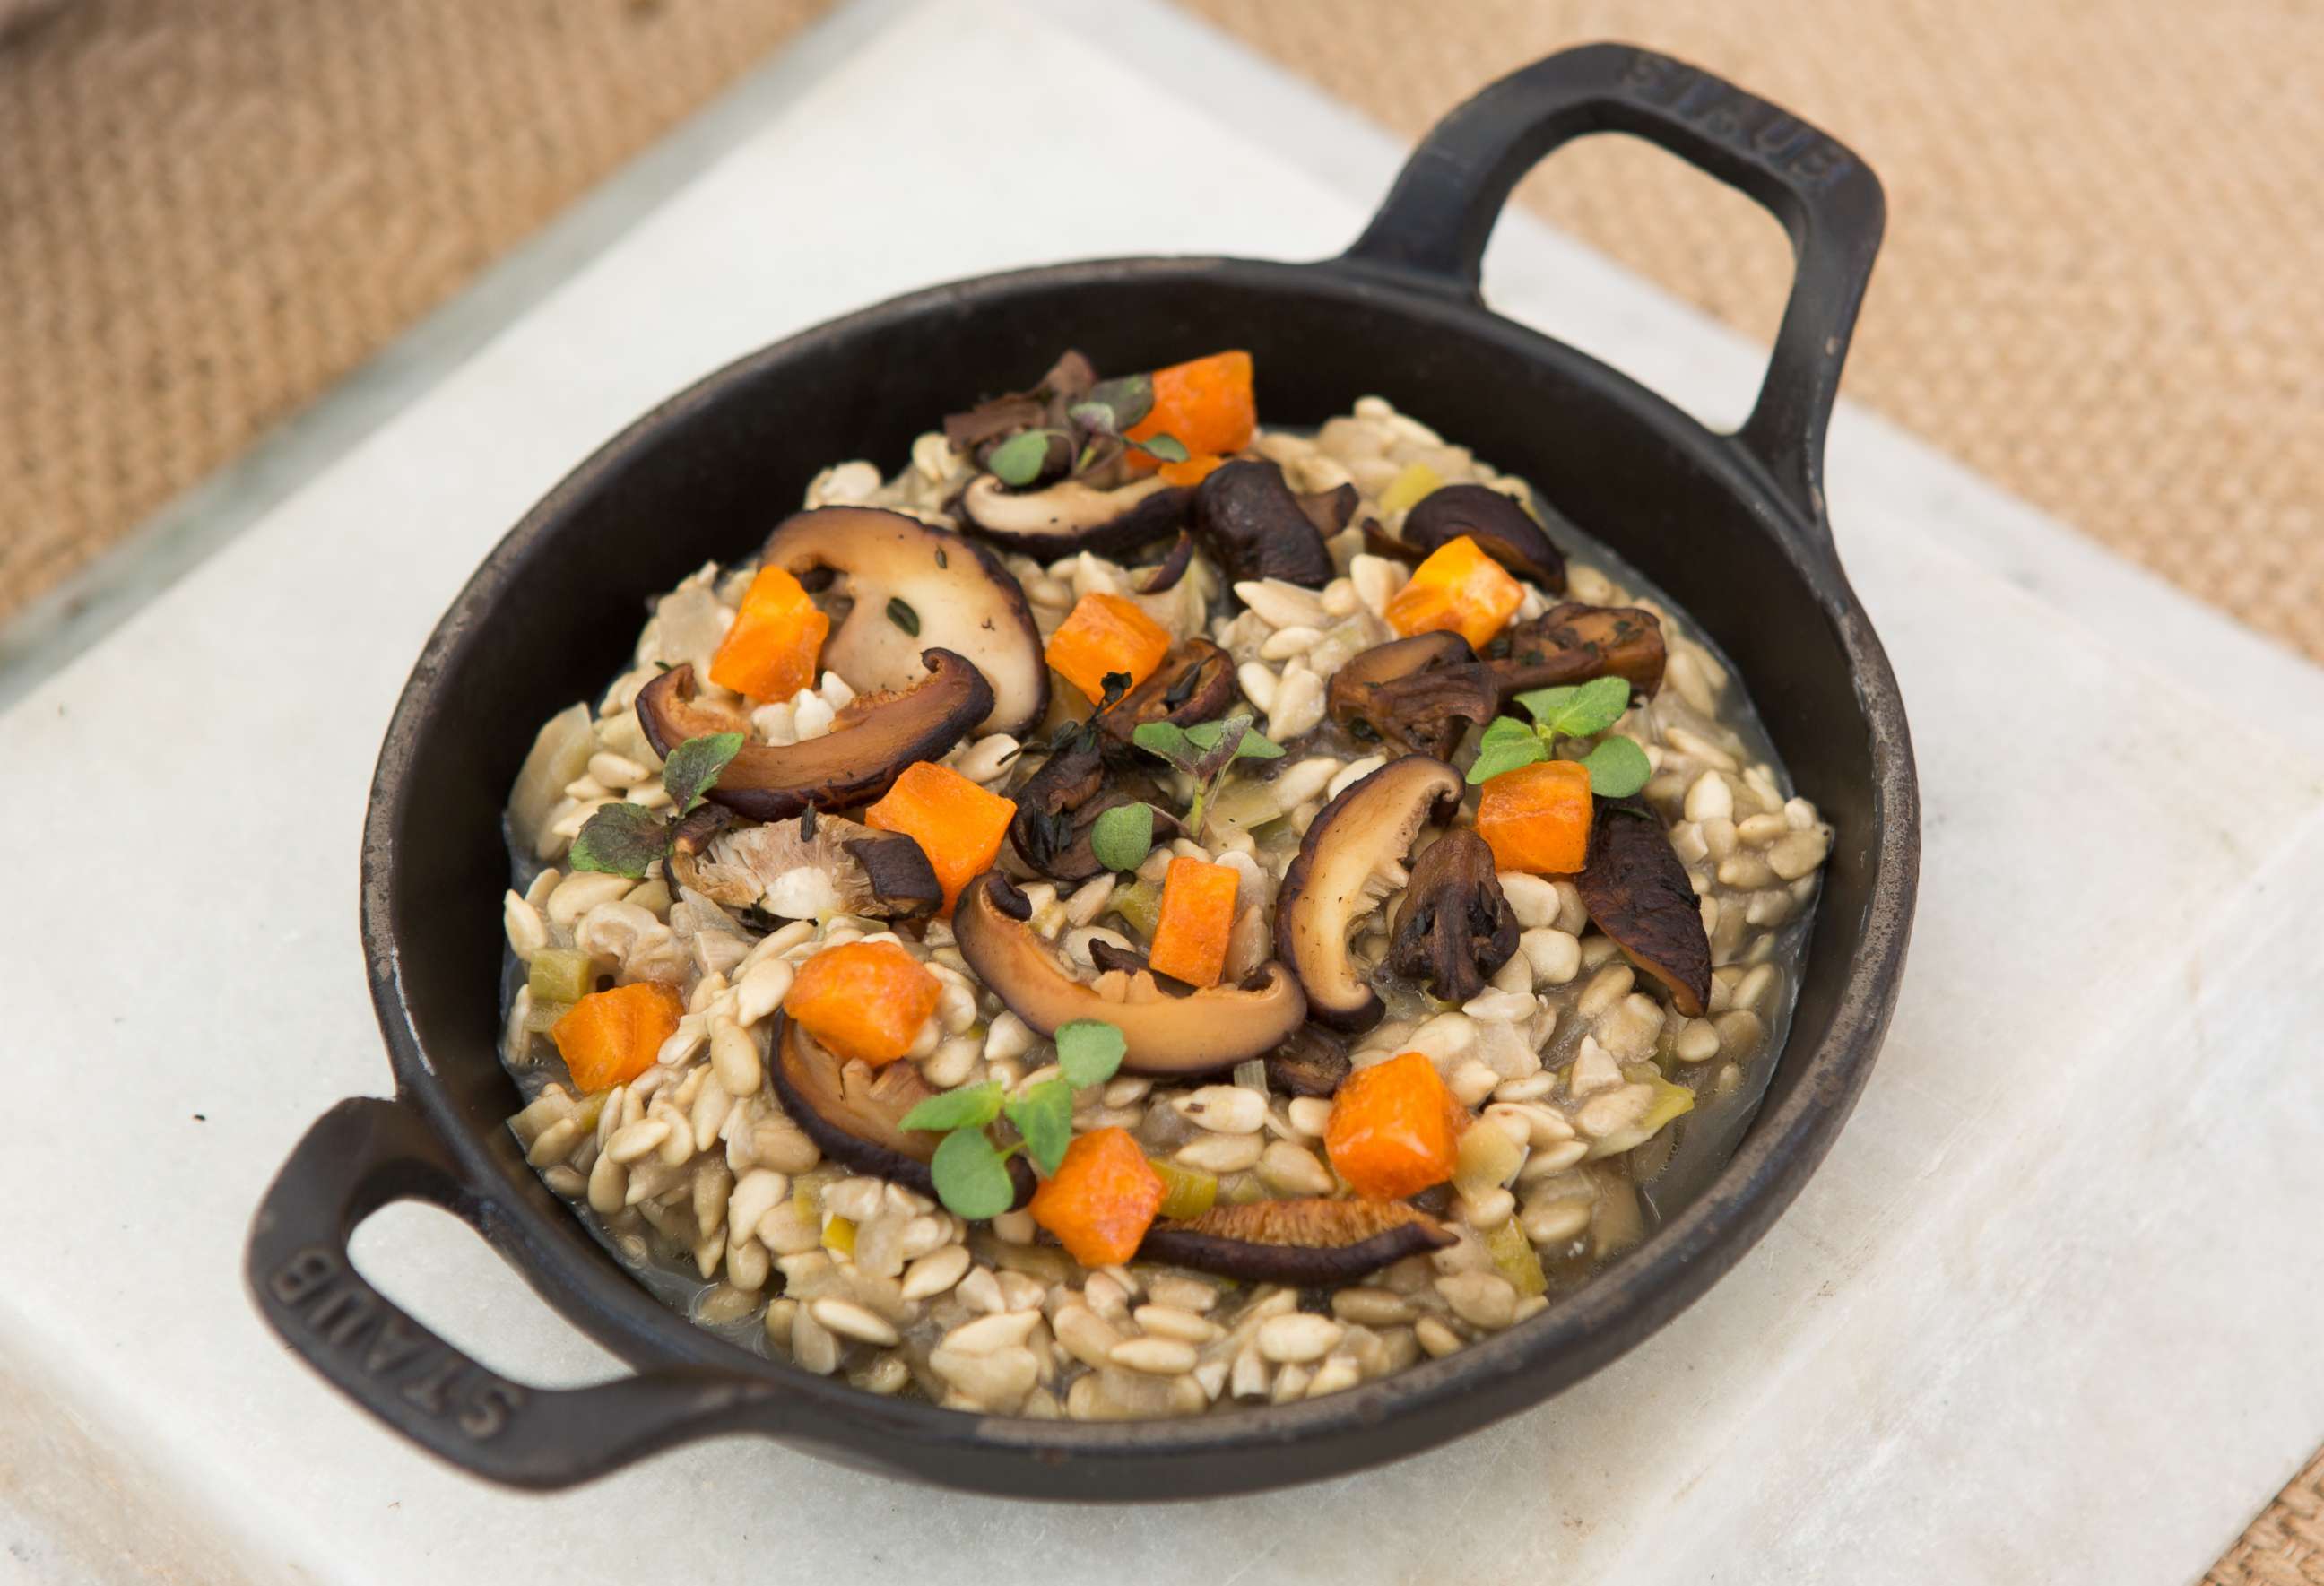 PHOTO: Guests at The Ranch are served plant-based meals, like this sunflower seed risotto.